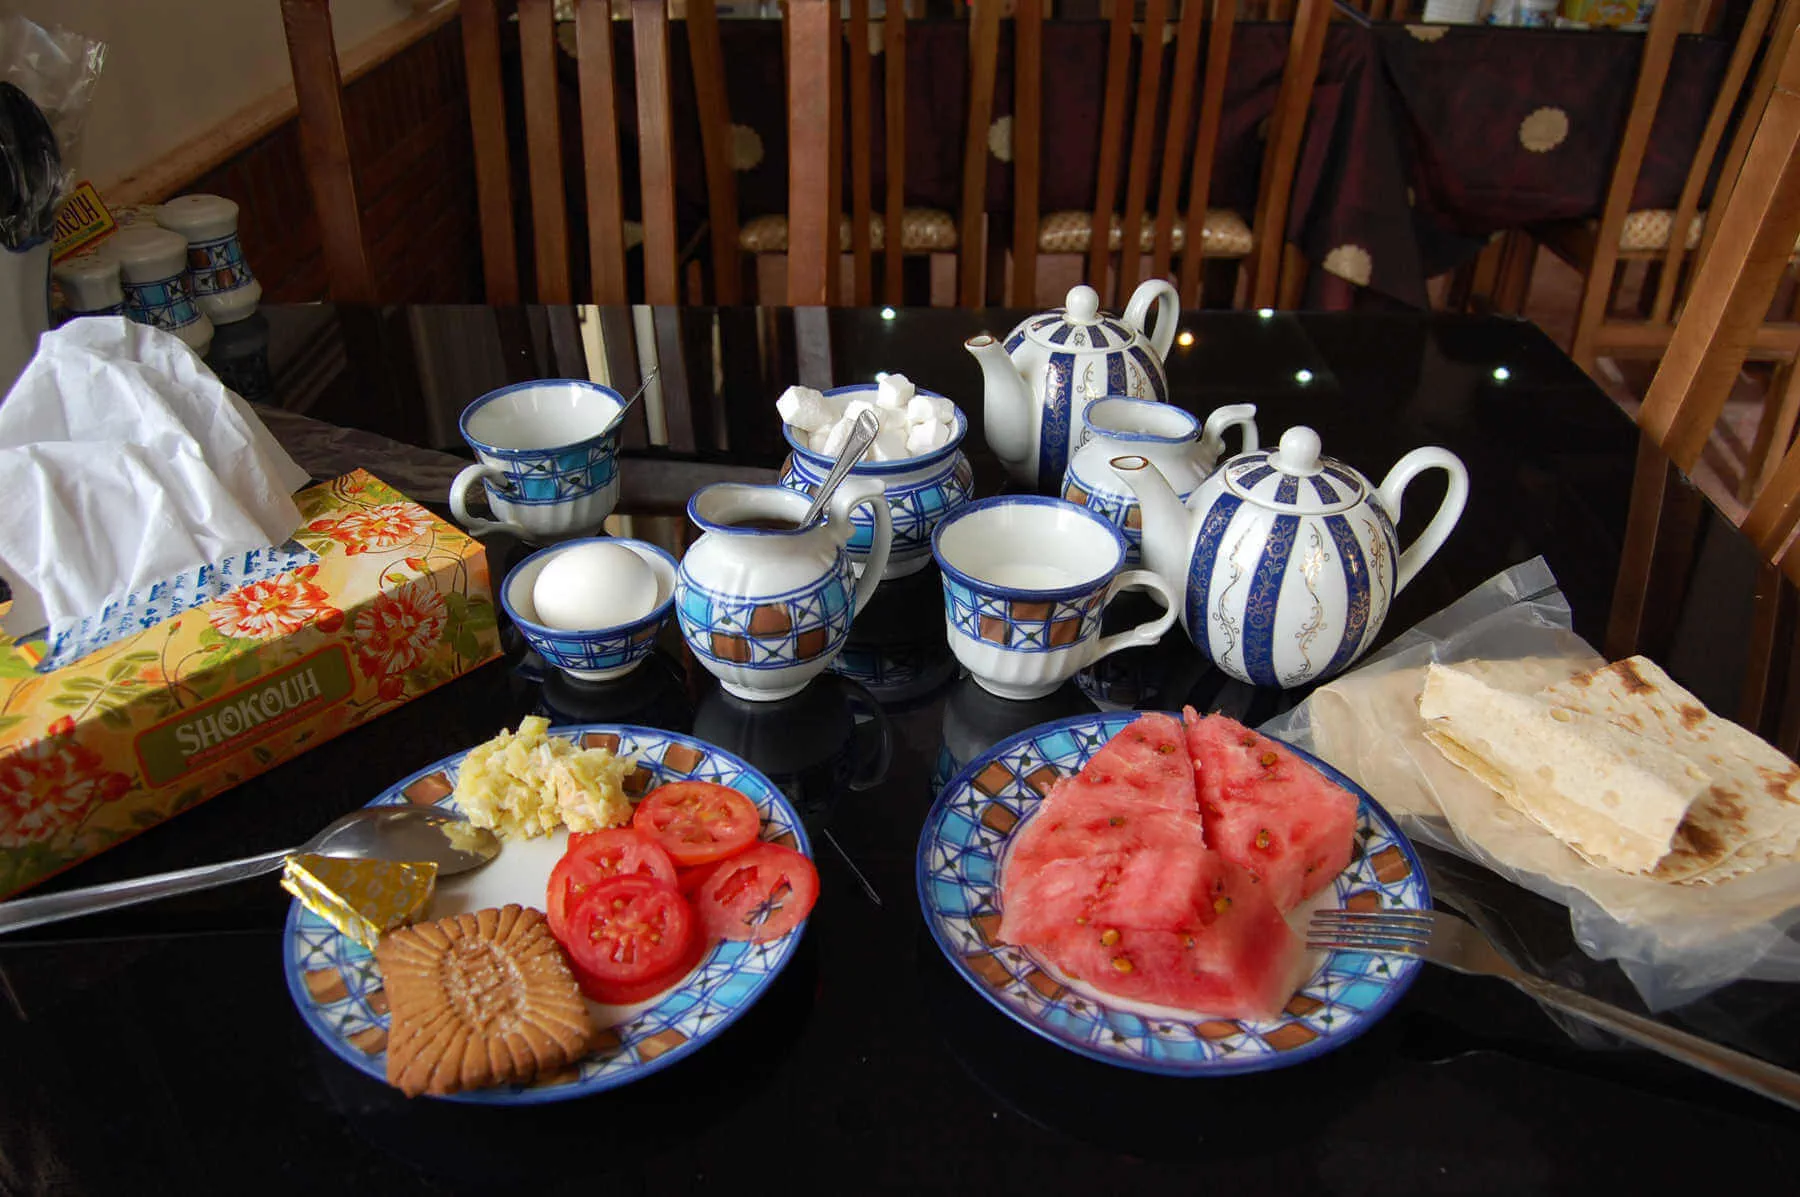 At Iranian restaurants, a box of Kleenex is always on the table, the coffee is instant, the bread is bagged to keep out dust, and juicy watermelon graces every meal